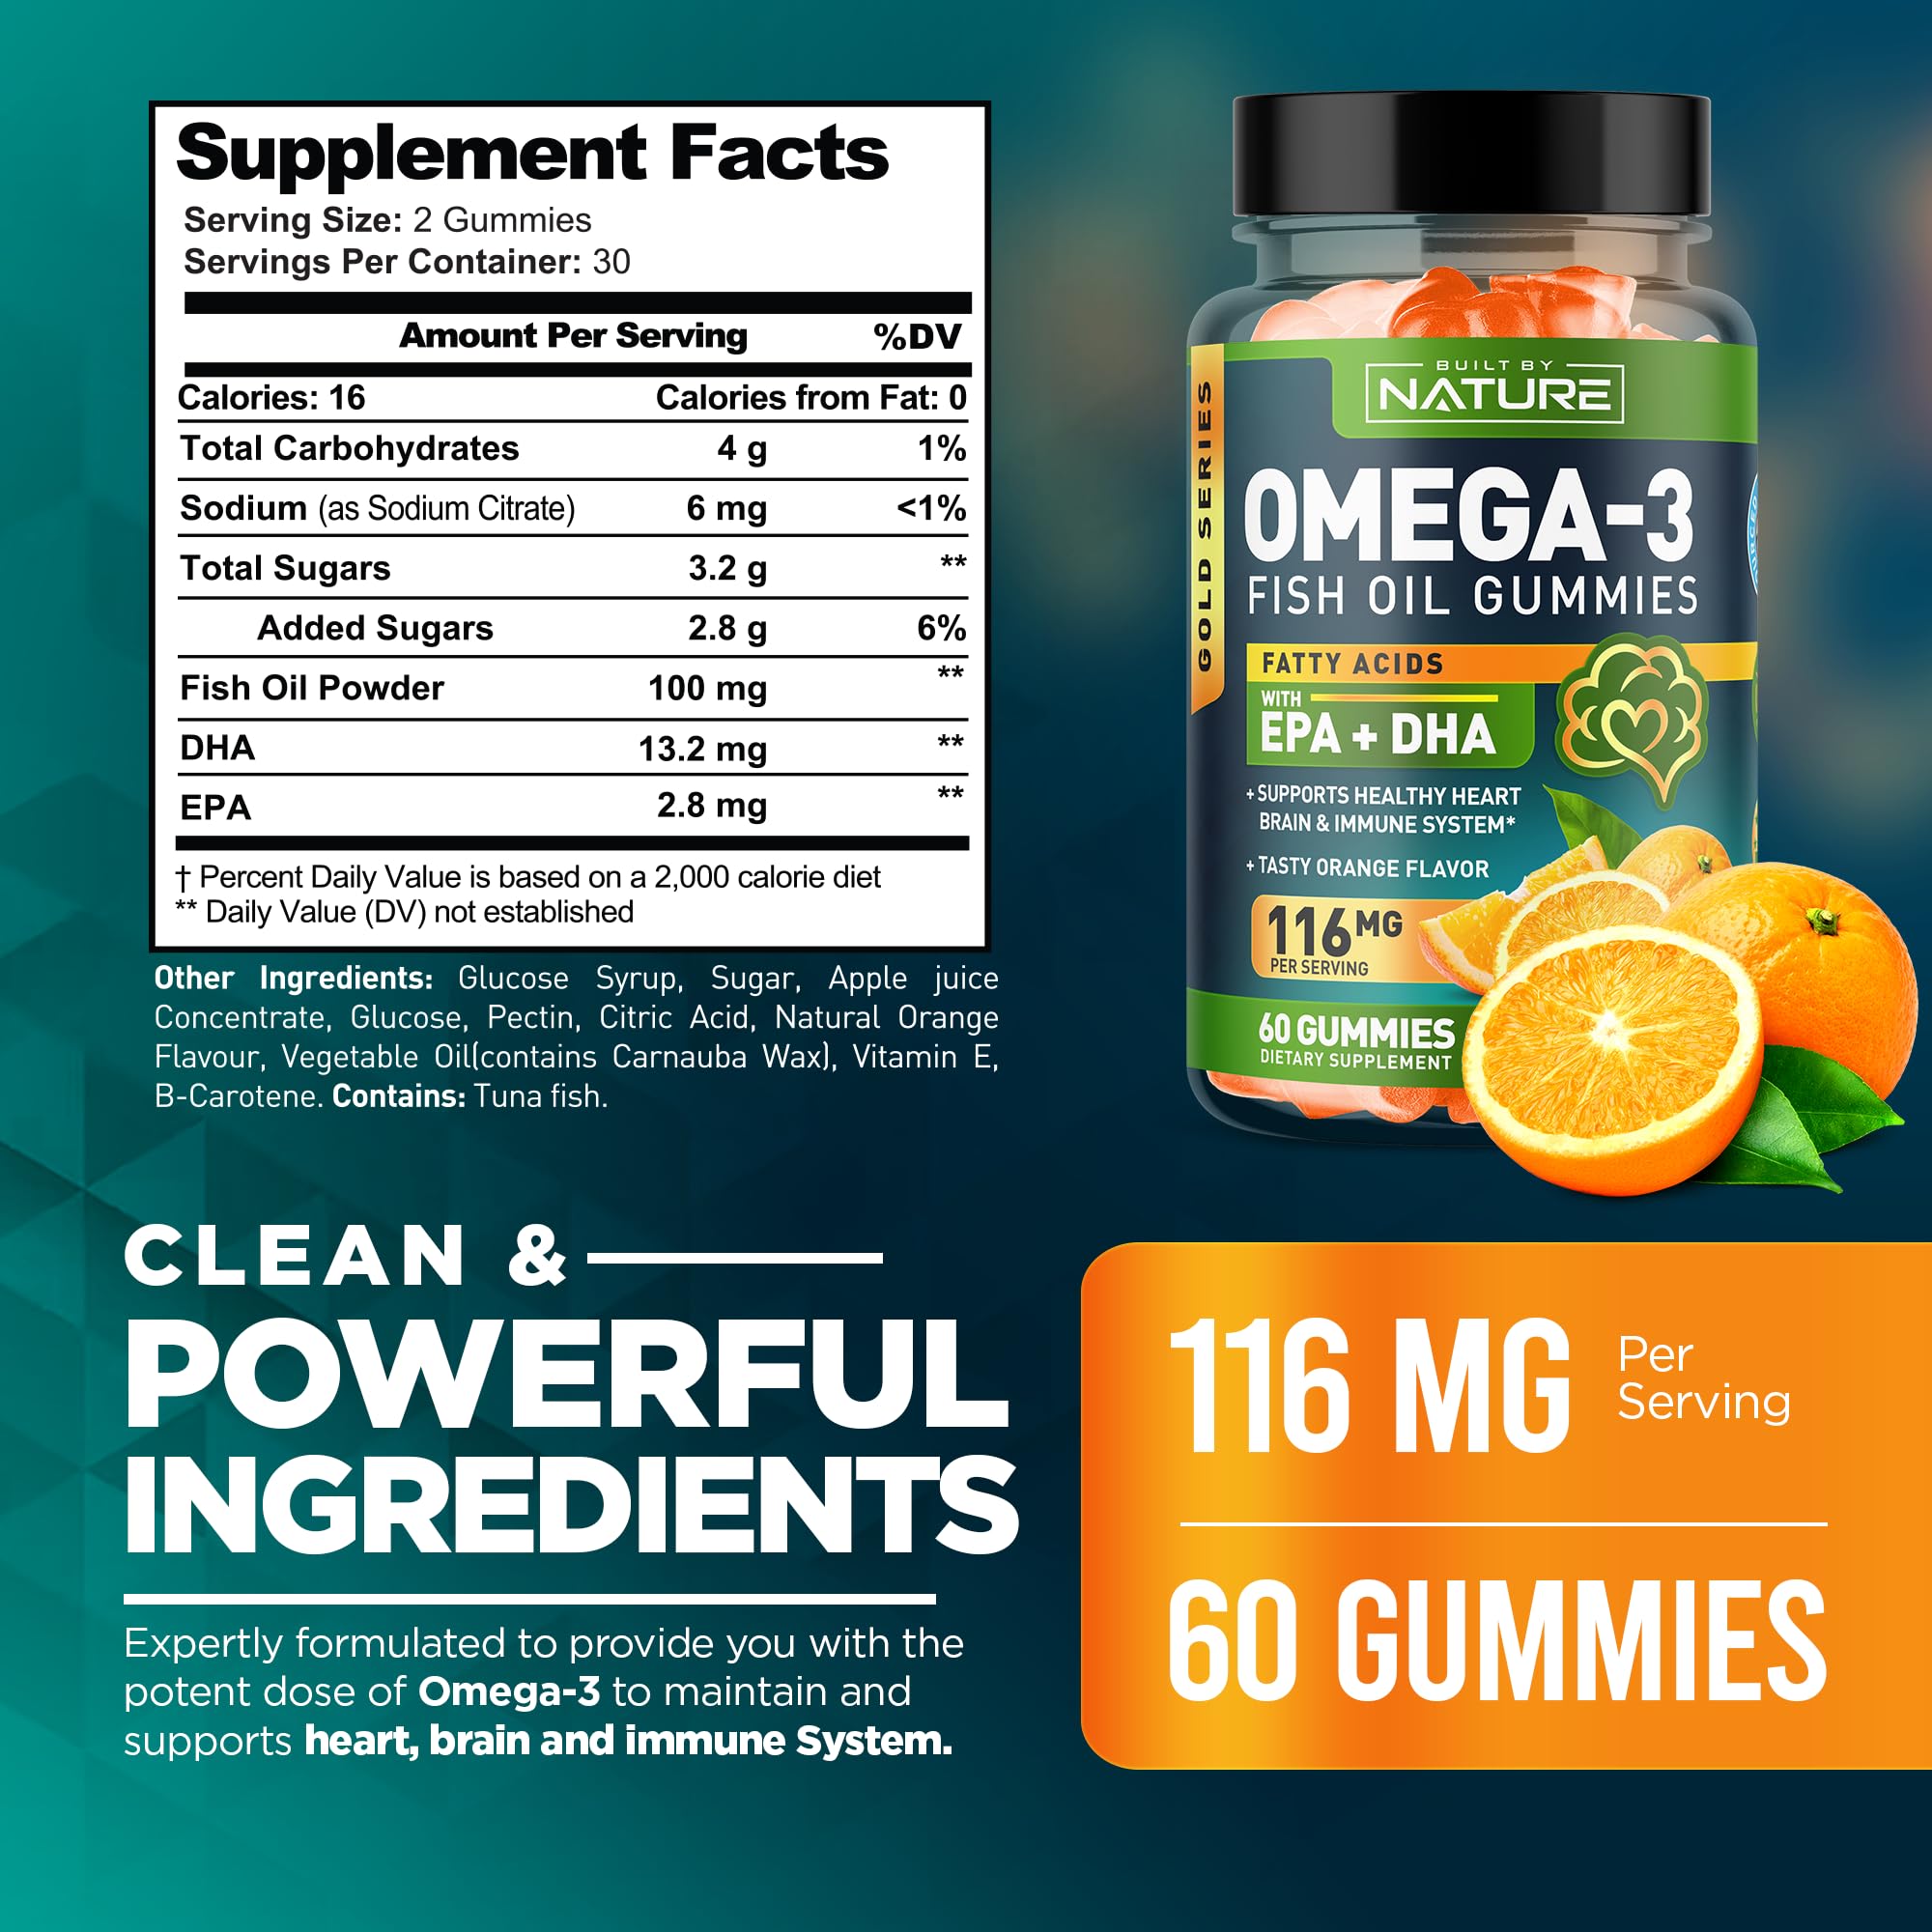 Omega 3 Fish Oil Gummies with EPA & DHA from Wild Fish - Triple Strength Omega 3 Fish Oil Gummy, Supports Healthy Heart, Brain & Immune System, Burpless & Natural - 60 Gummies, 30 Day Supply